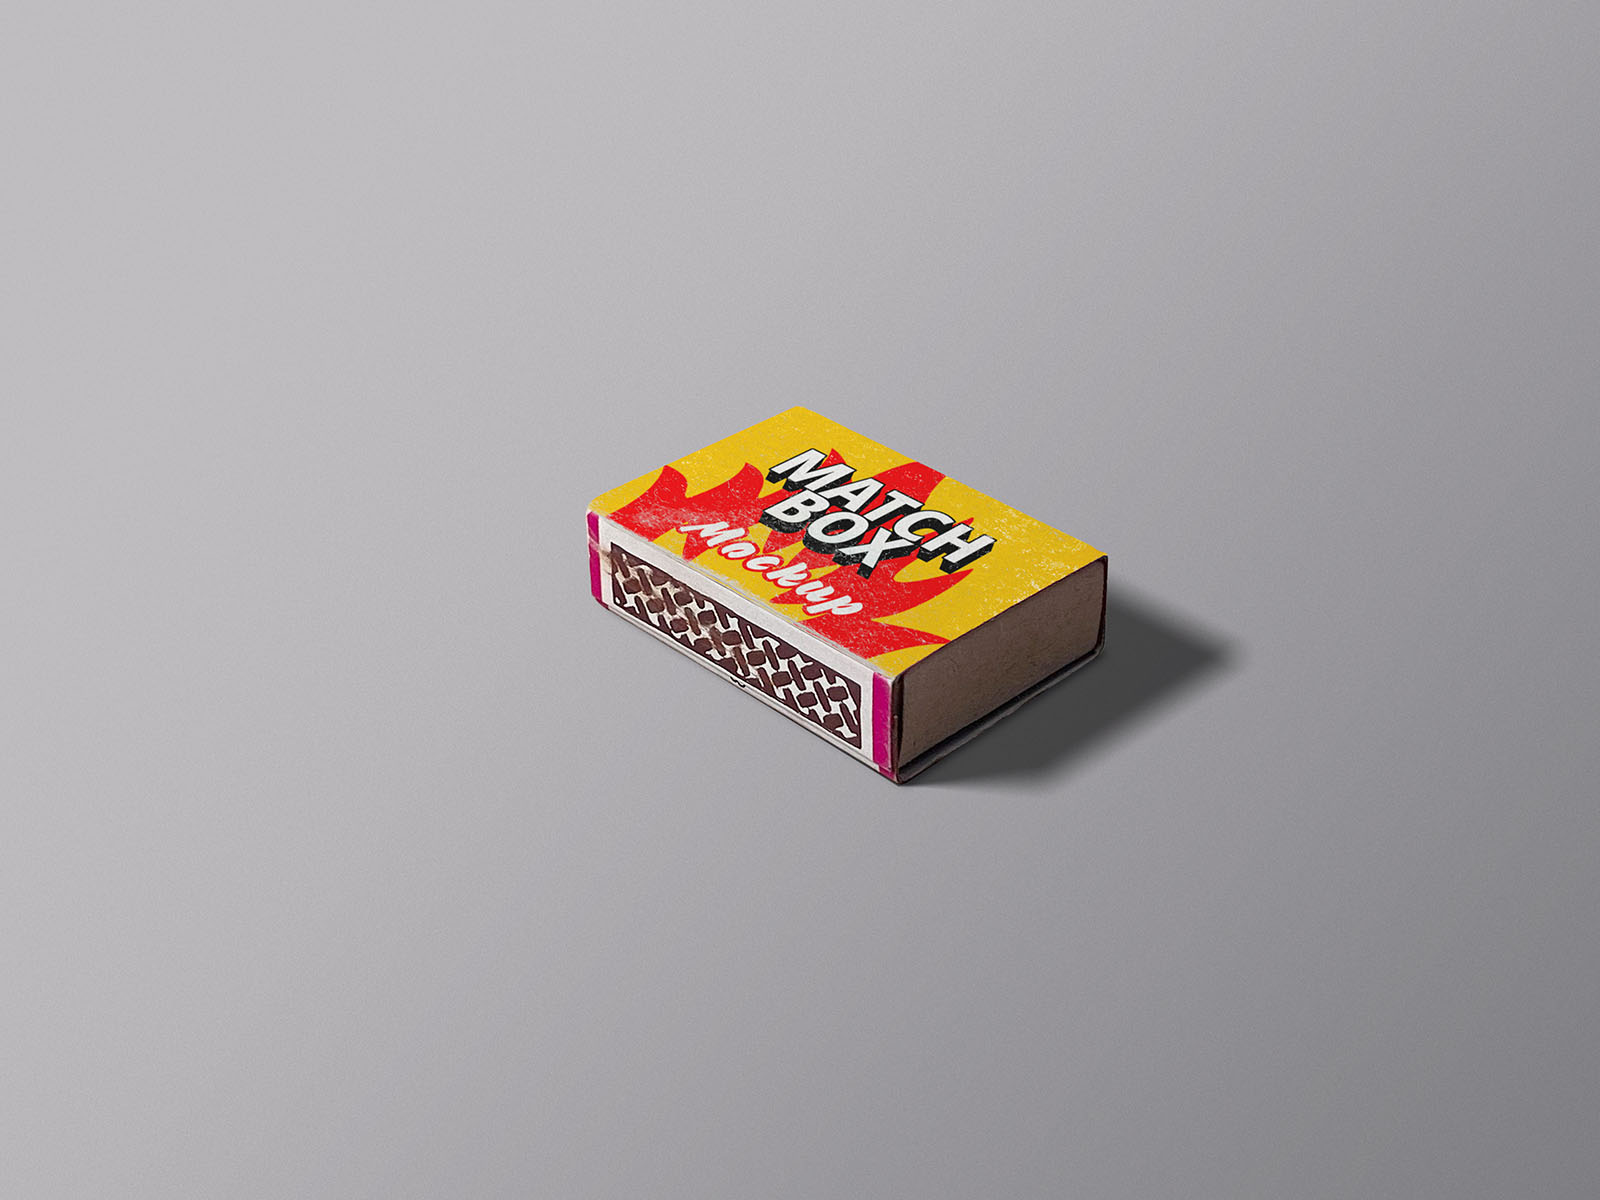 Withered Matchbox Mockup Template